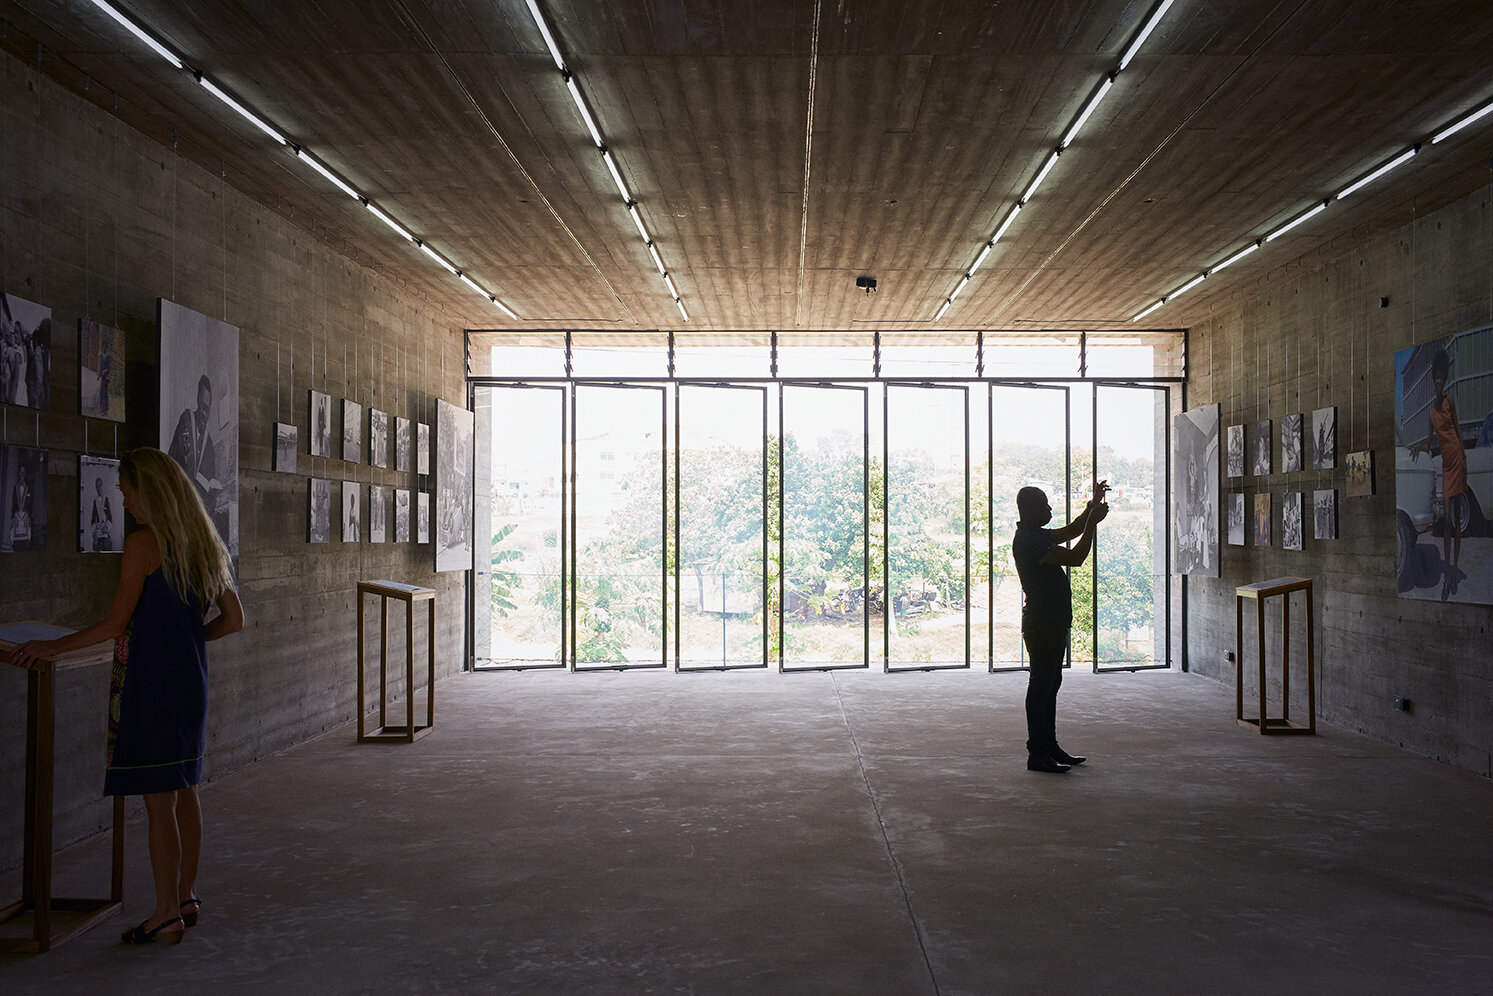 The main gallery of the new building of the Nubuke Foundation